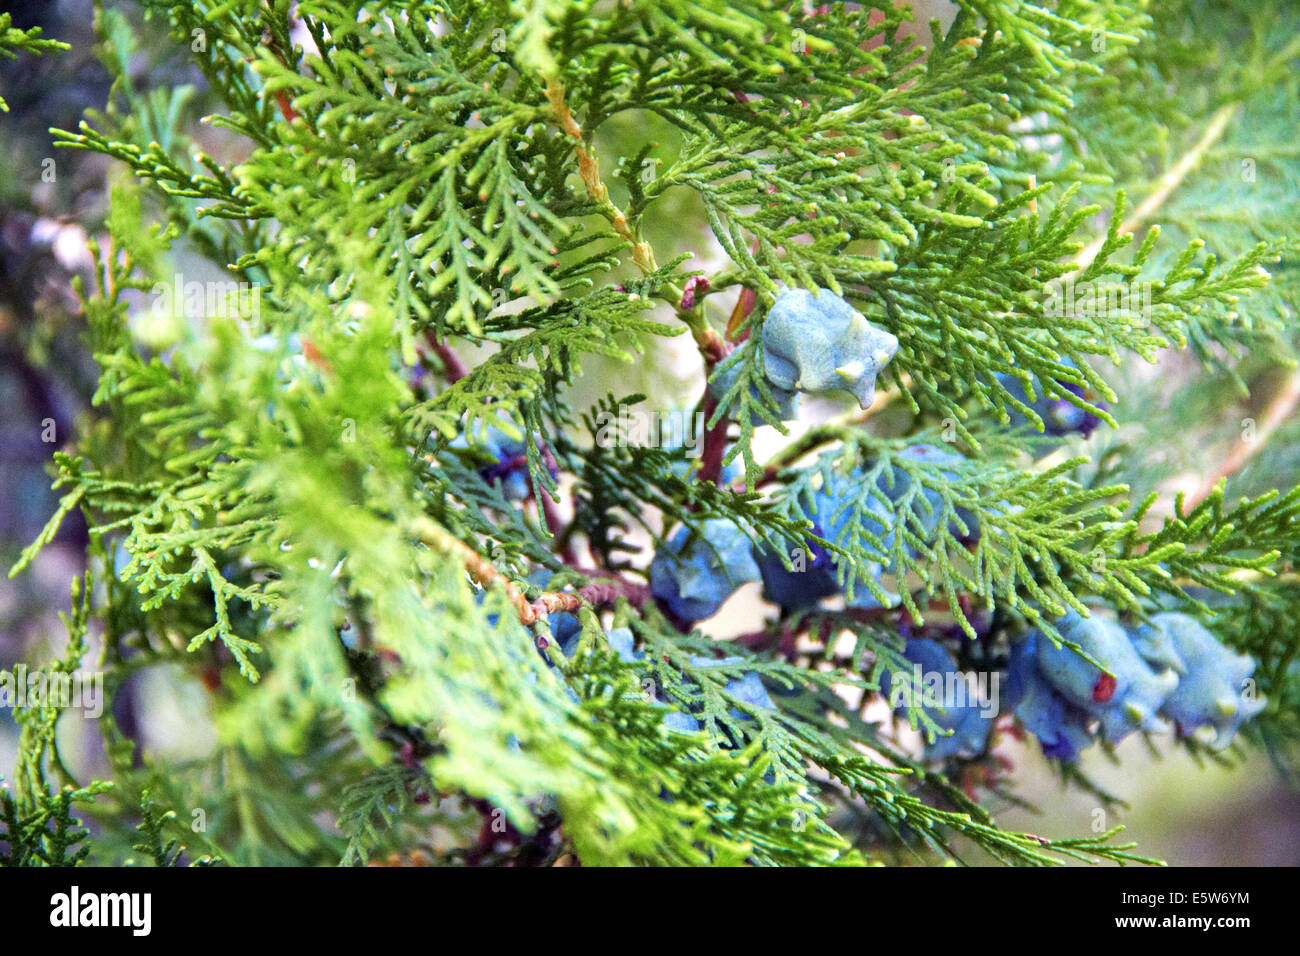 Thuja with fruit on the branches Stock Photo